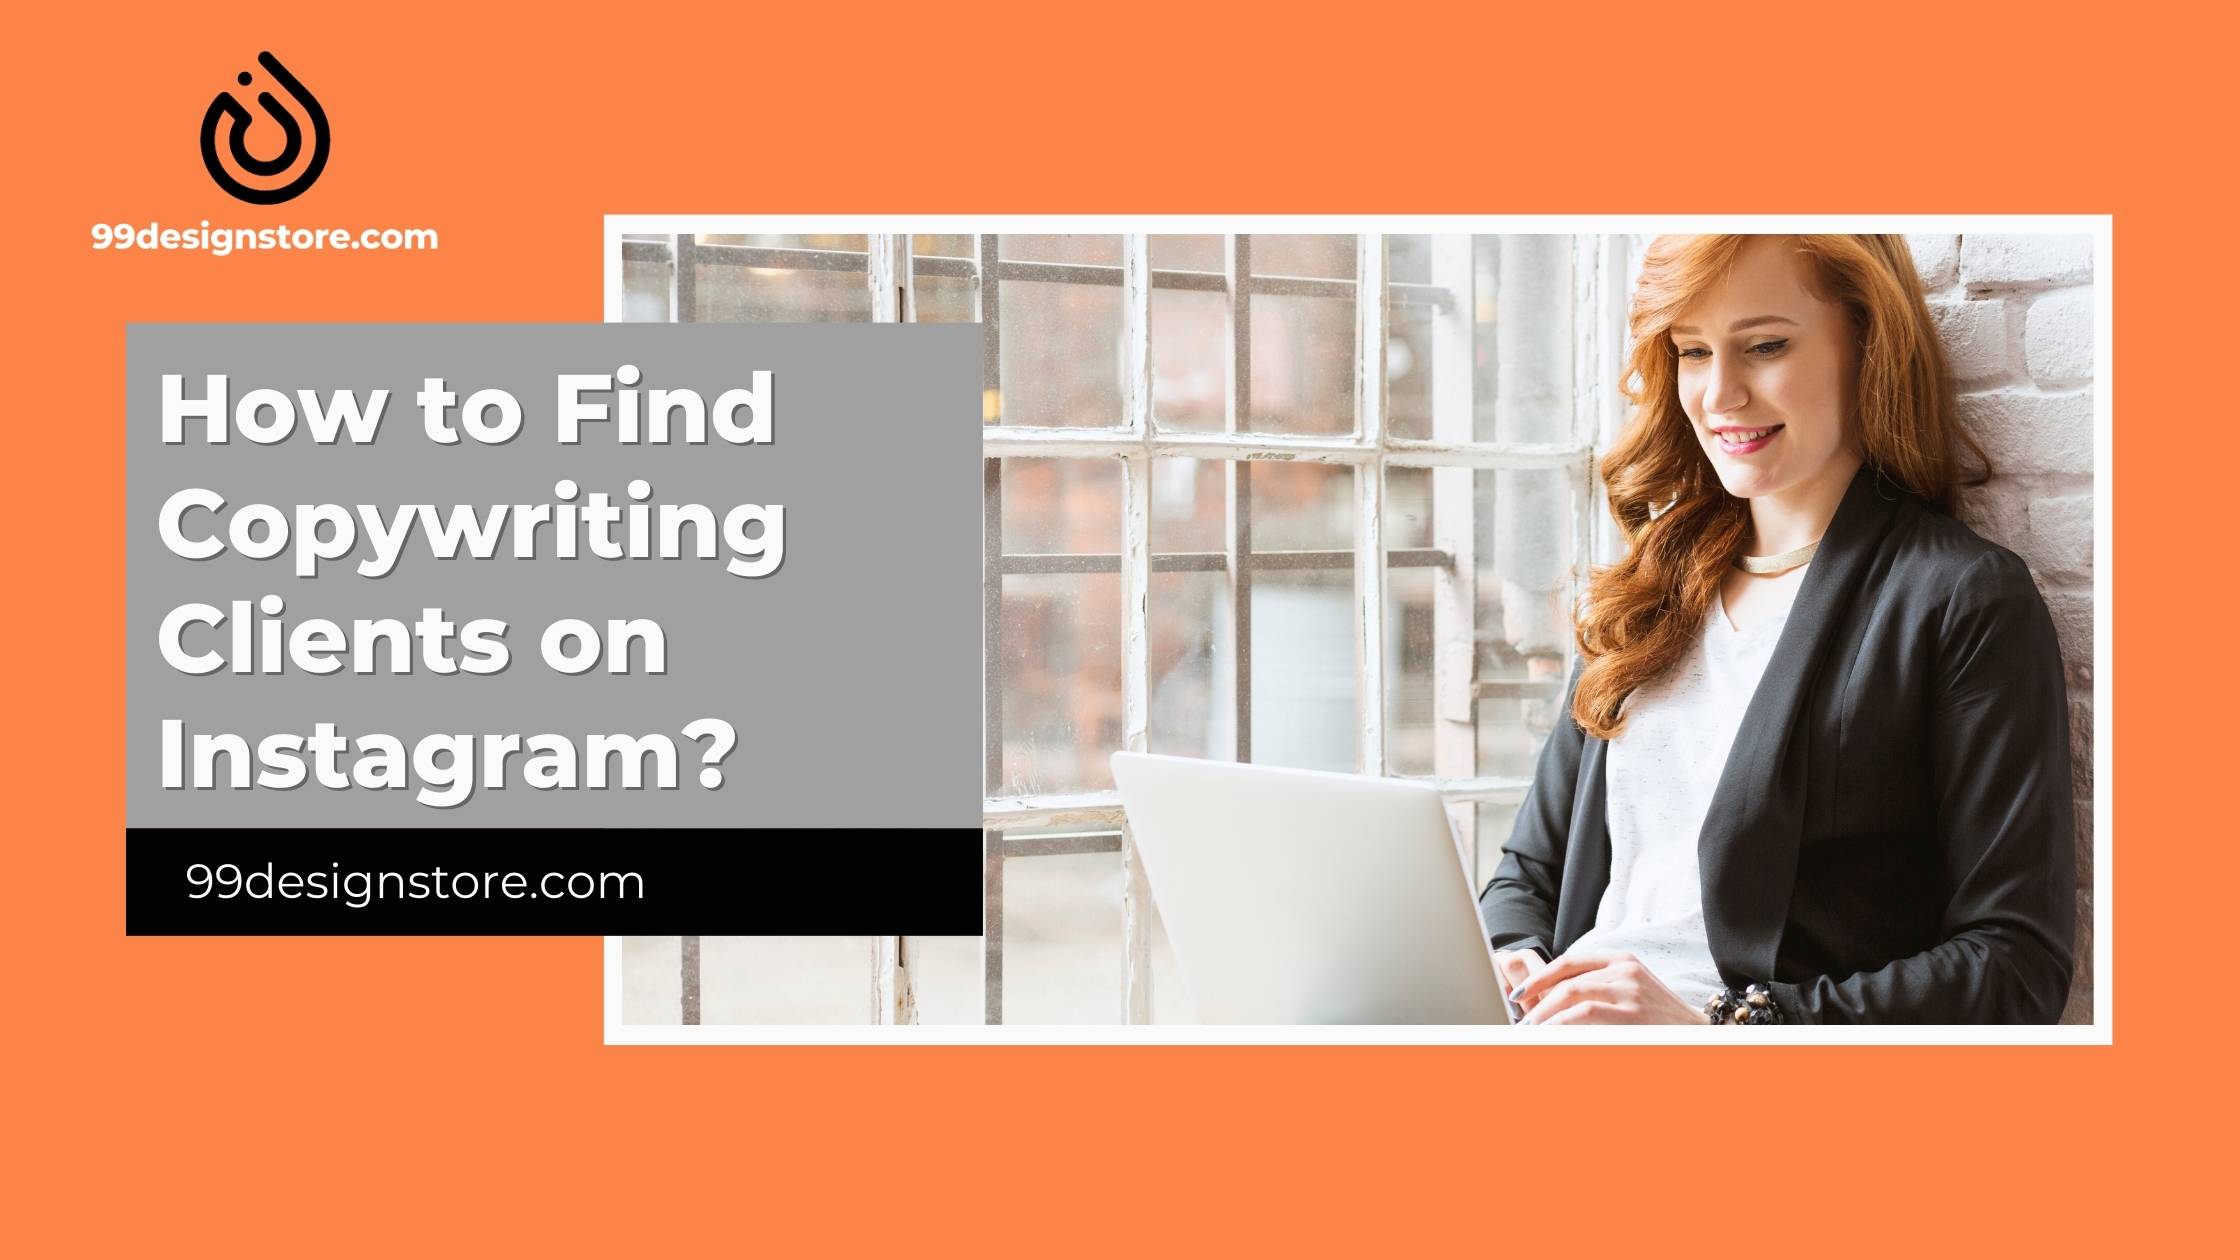 How to Find Copywriting Clients on Instagram